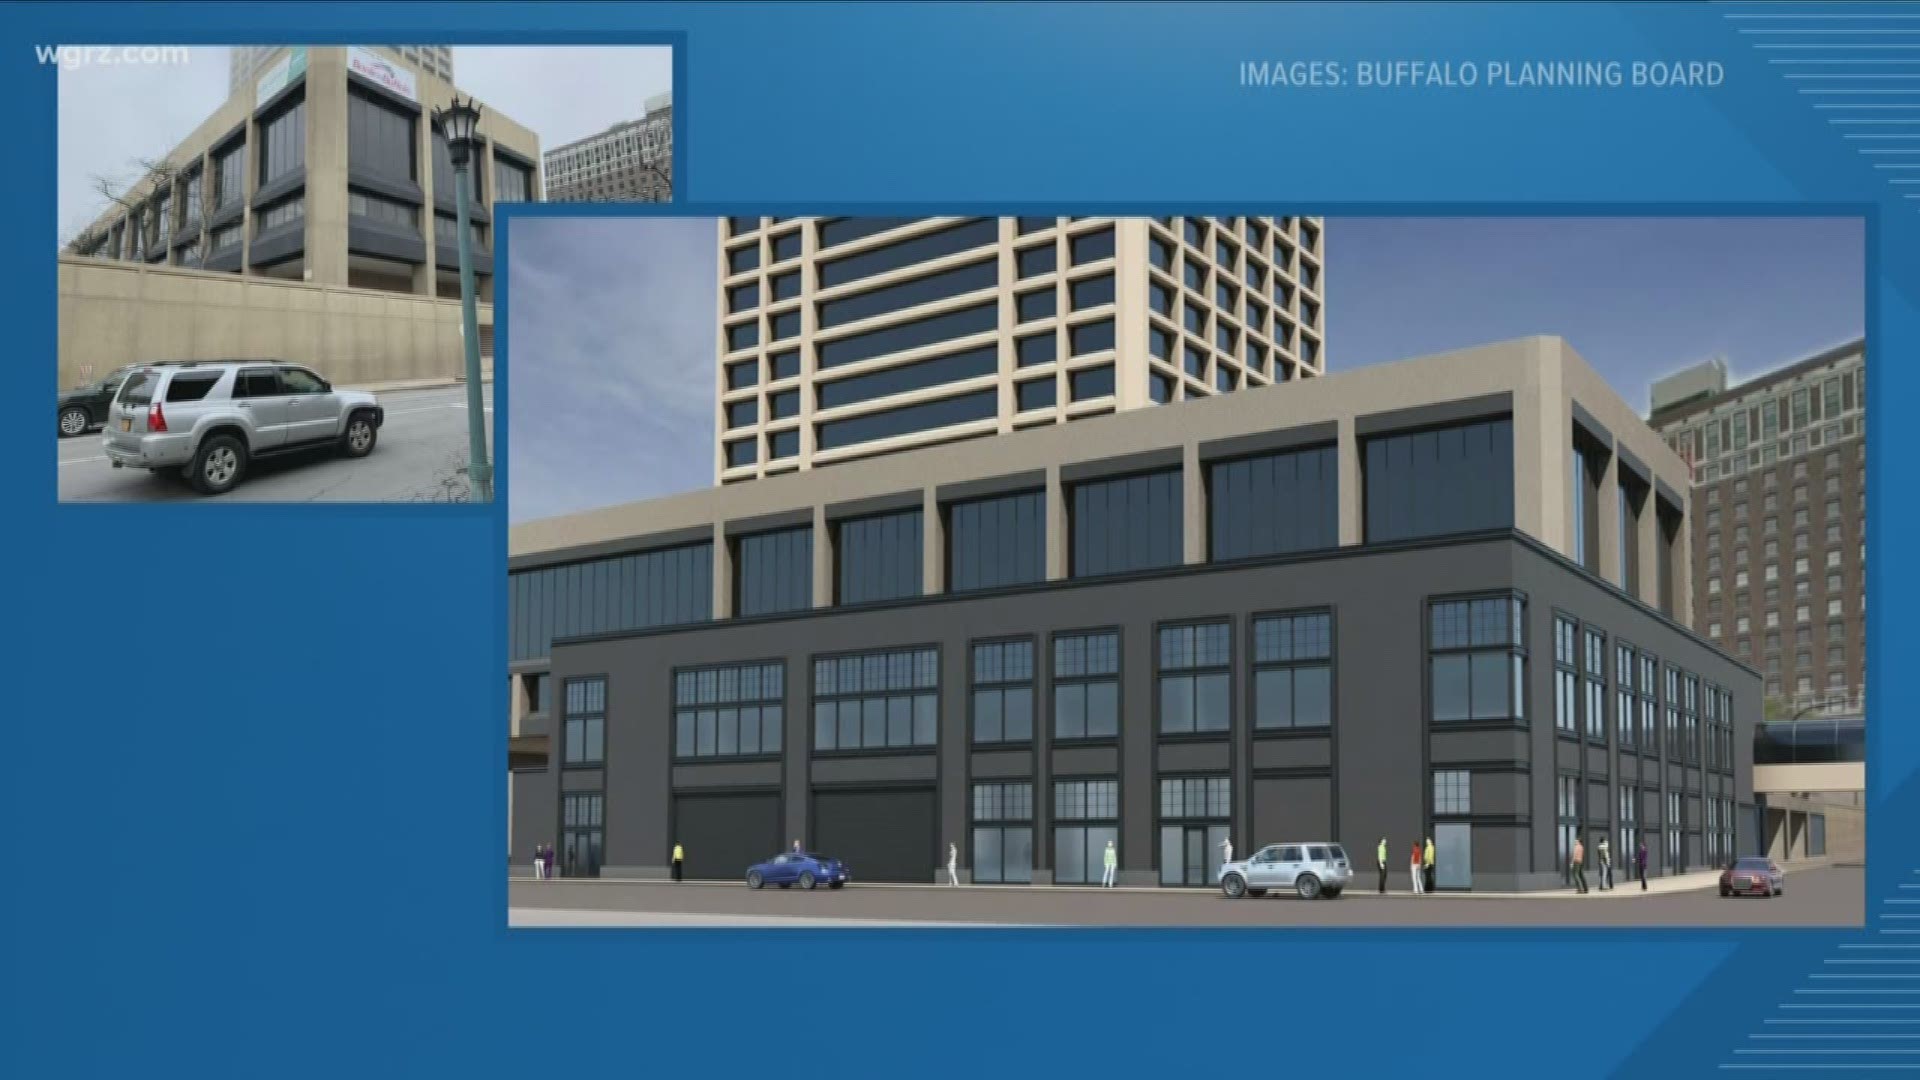 and now hopes to get city approval to add more square footage around the annex -- which is at the base of the building.